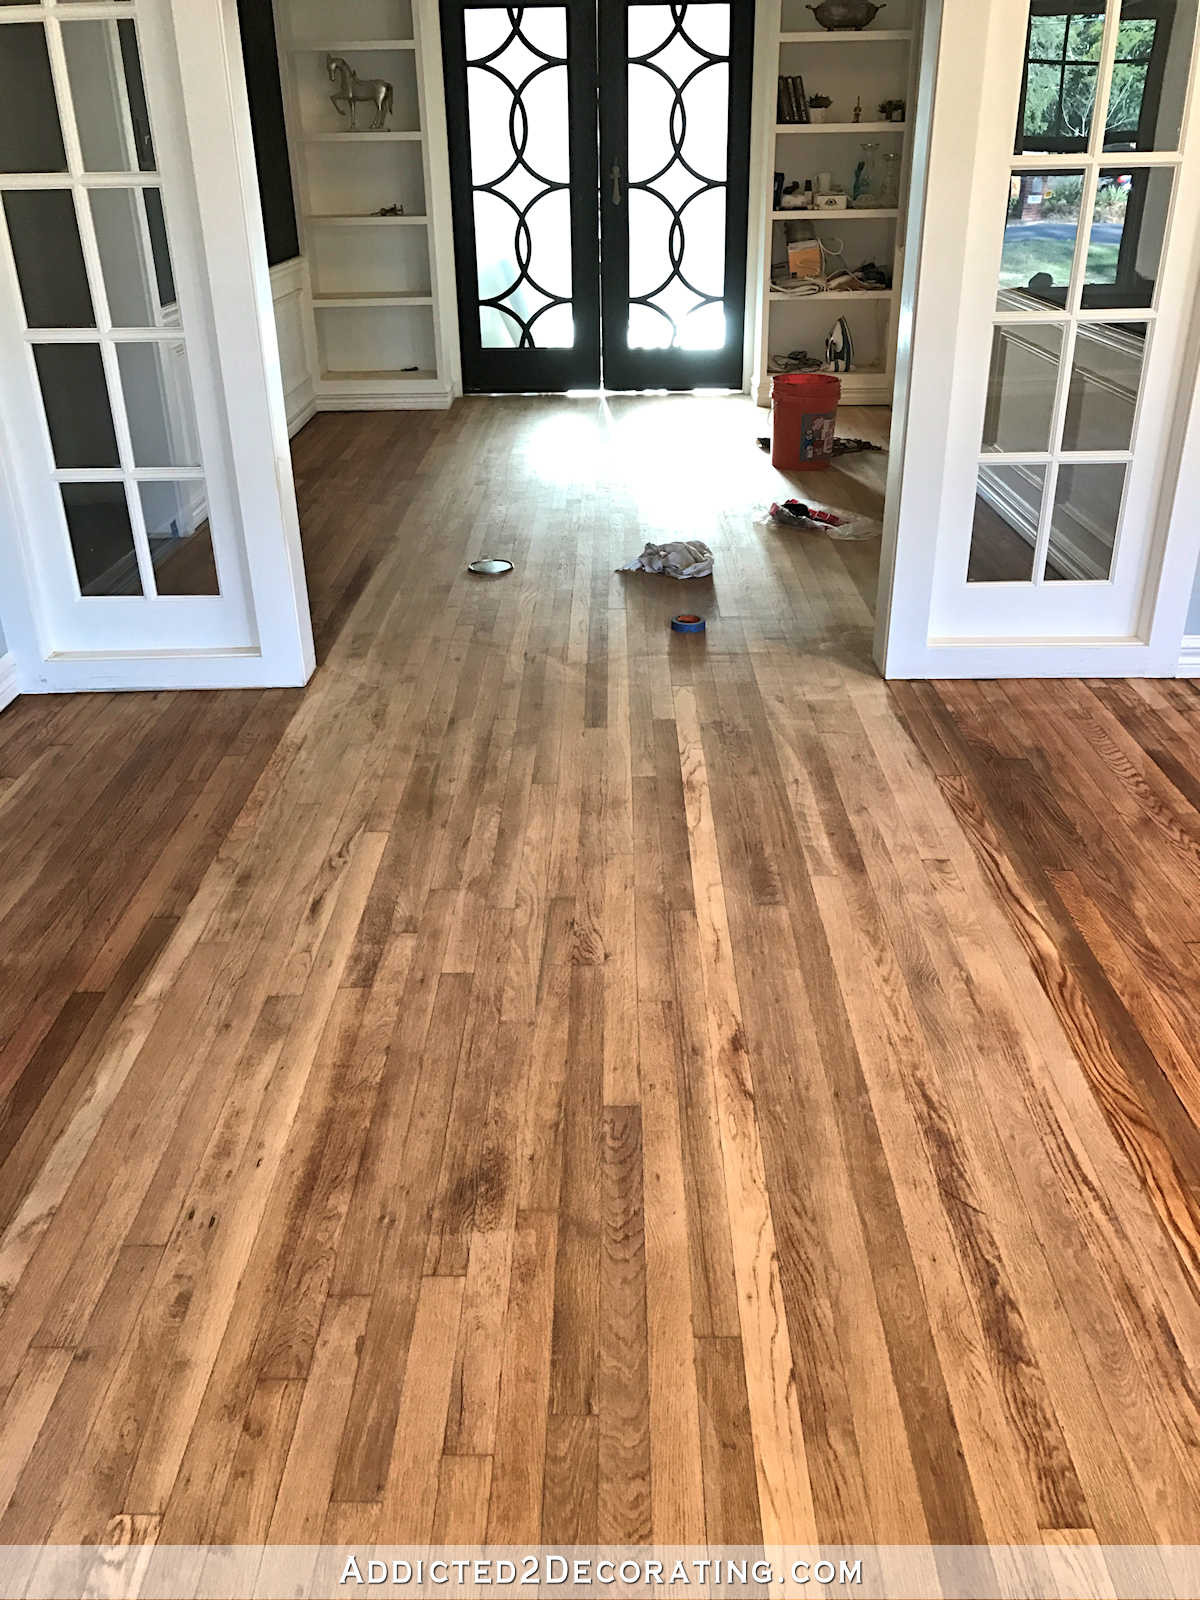 30 Stylish Old Hardwood Floors 2024 free download old hardwood floors of refinishing old hardwood floors 50 inspirational how to redo for refinishing old hardwood floors adventures in staining my red oak hardwood floors products process